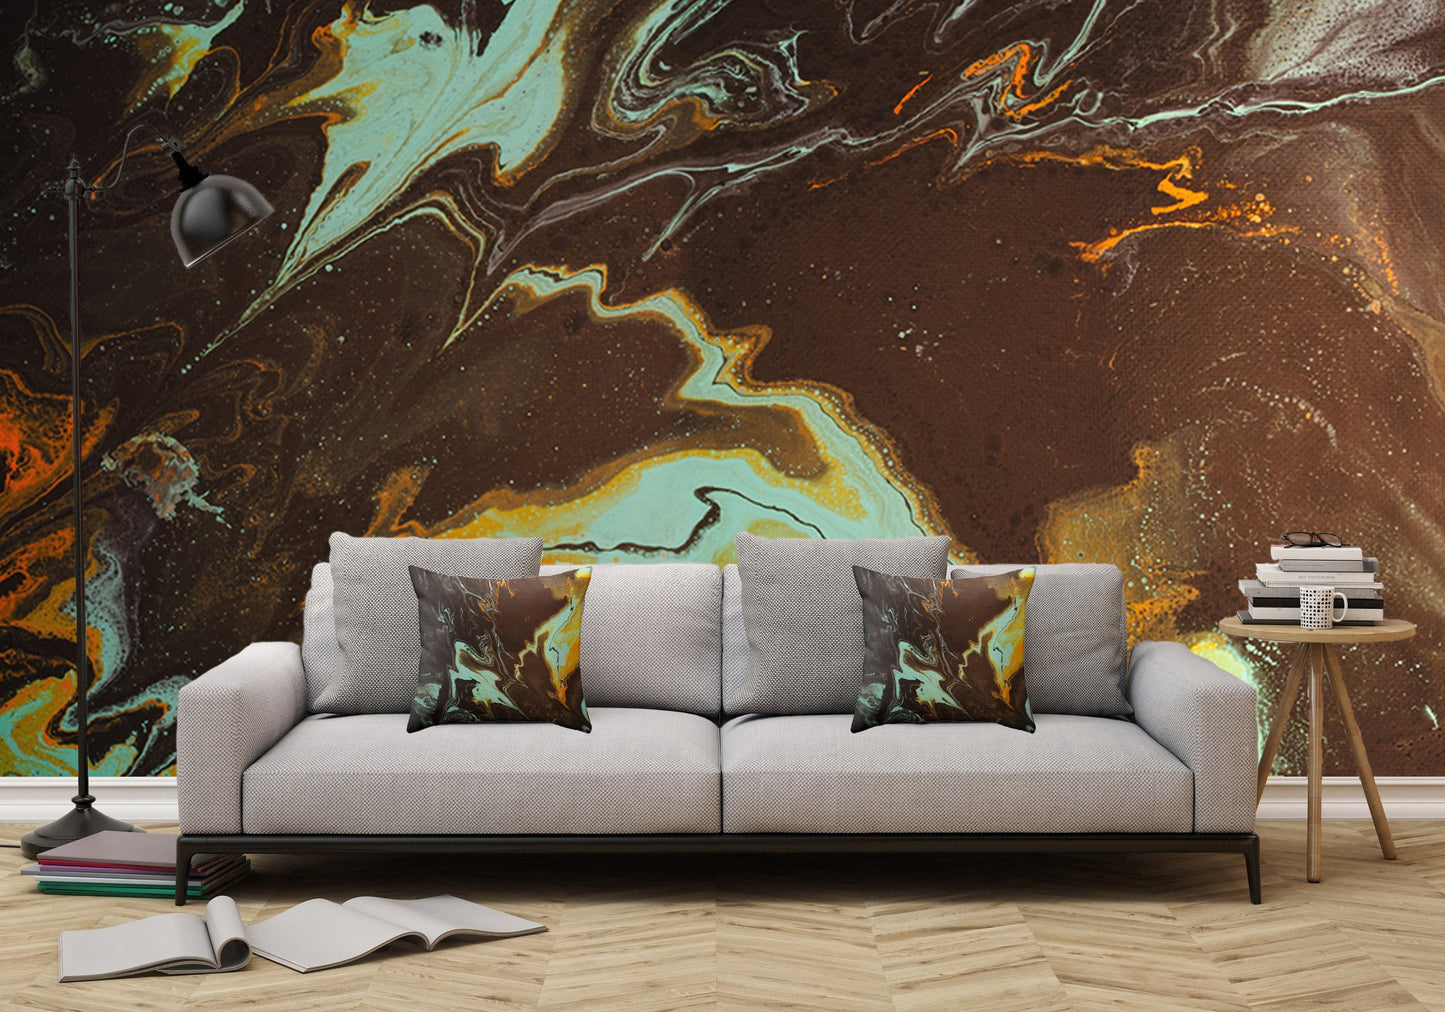 Removable Wall Mural - Wallpaper  Abstract Artwork - Fluid Art Pour 3  - PIPAFINEART